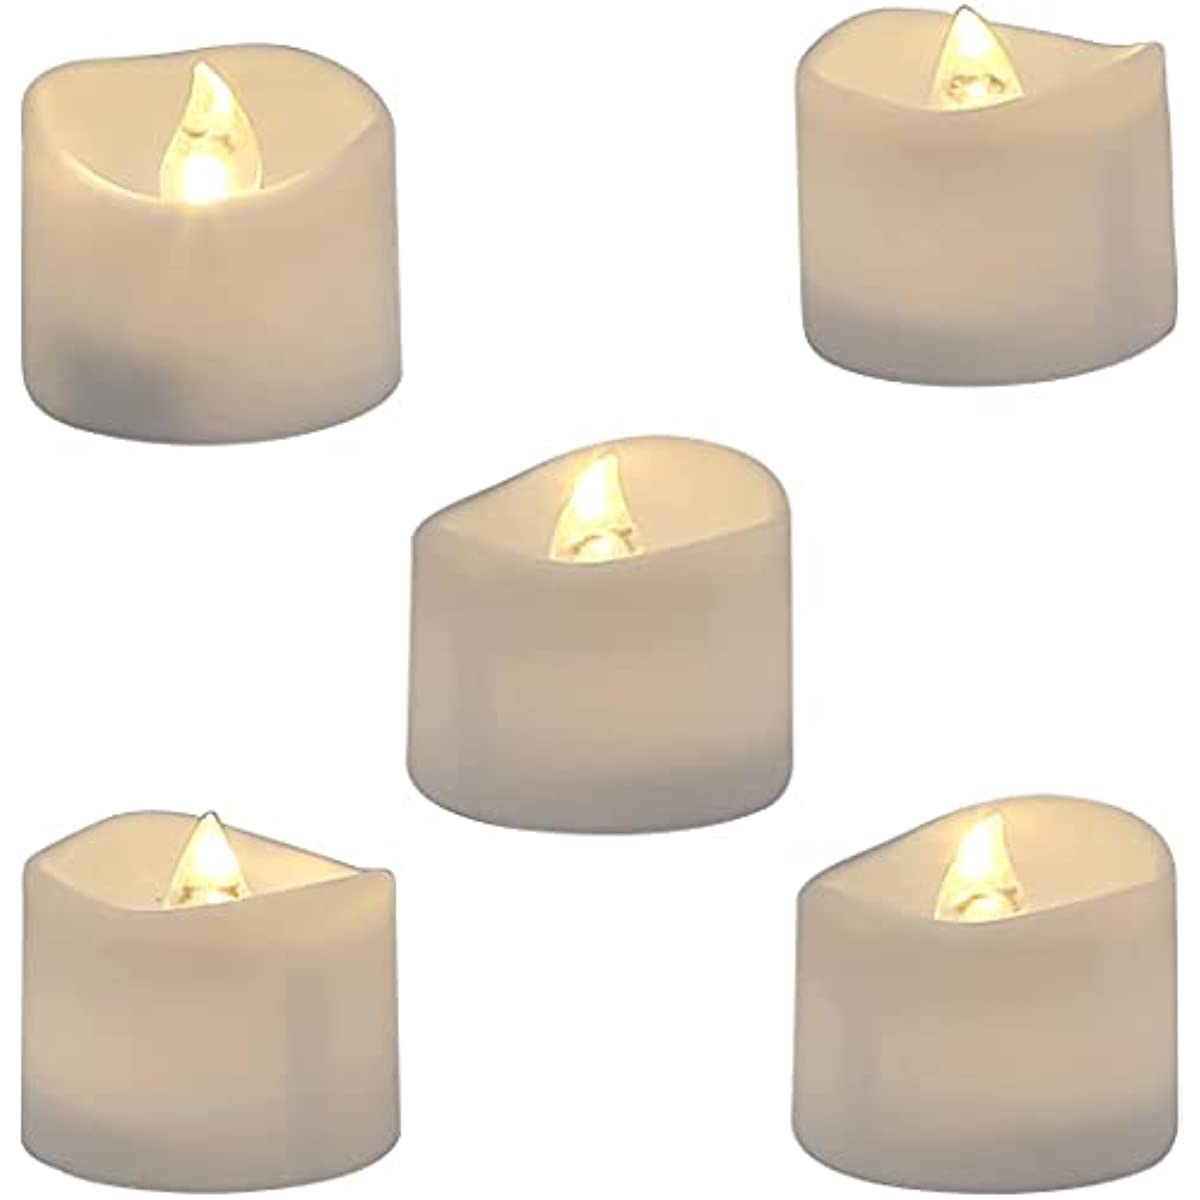 Flameless Tea Lights Candles. Last 5days Longer Battery Operated LED Votive Candles. 12 pcs Flickering Tealights with Warm White Light for Wedding. Valentine's Day. Halloween. Christmas